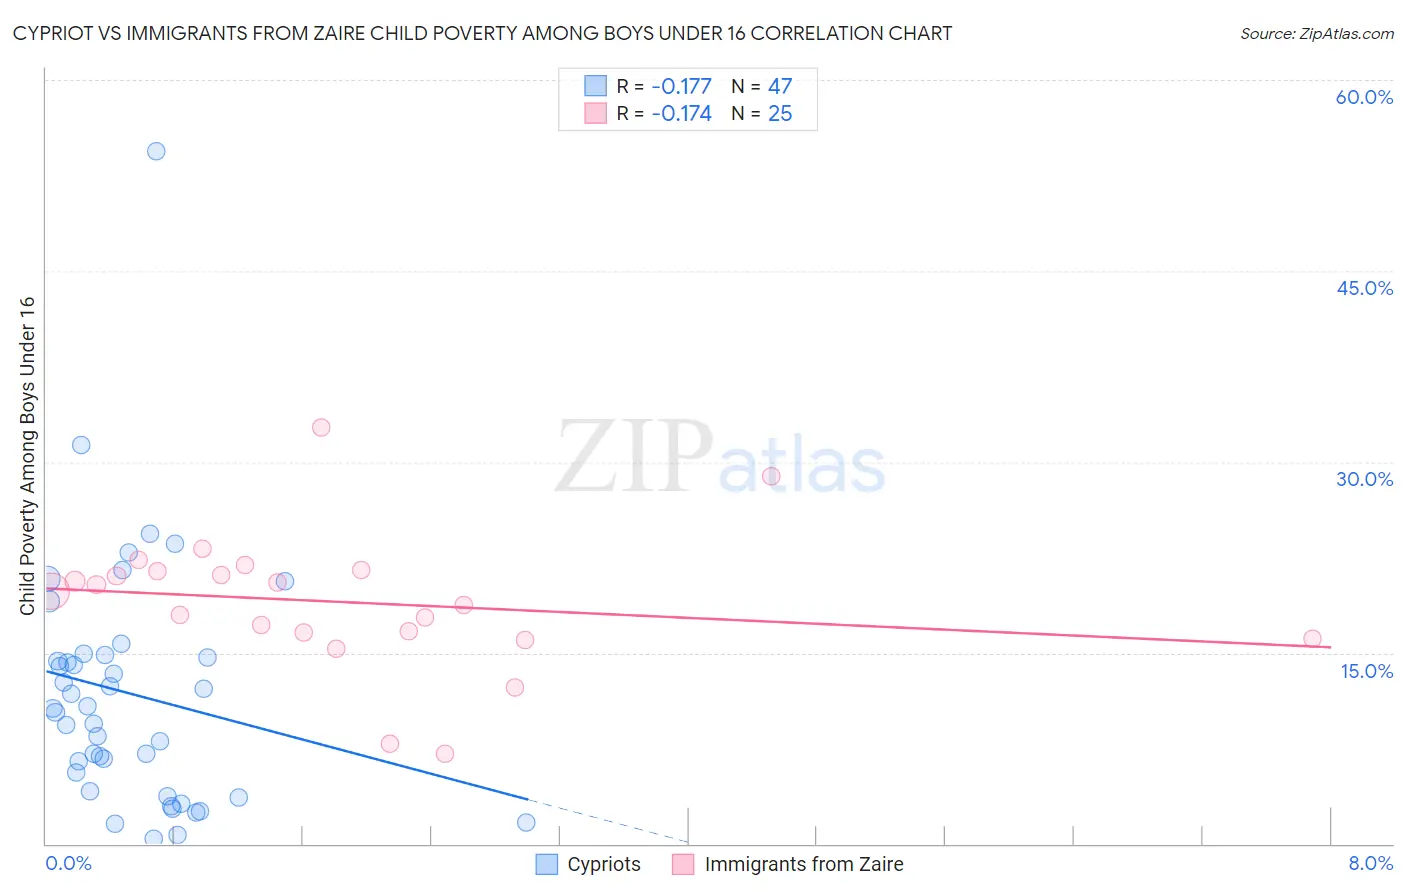 Cypriot vs Immigrants from Zaire Child Poverty Among Boys Under 16